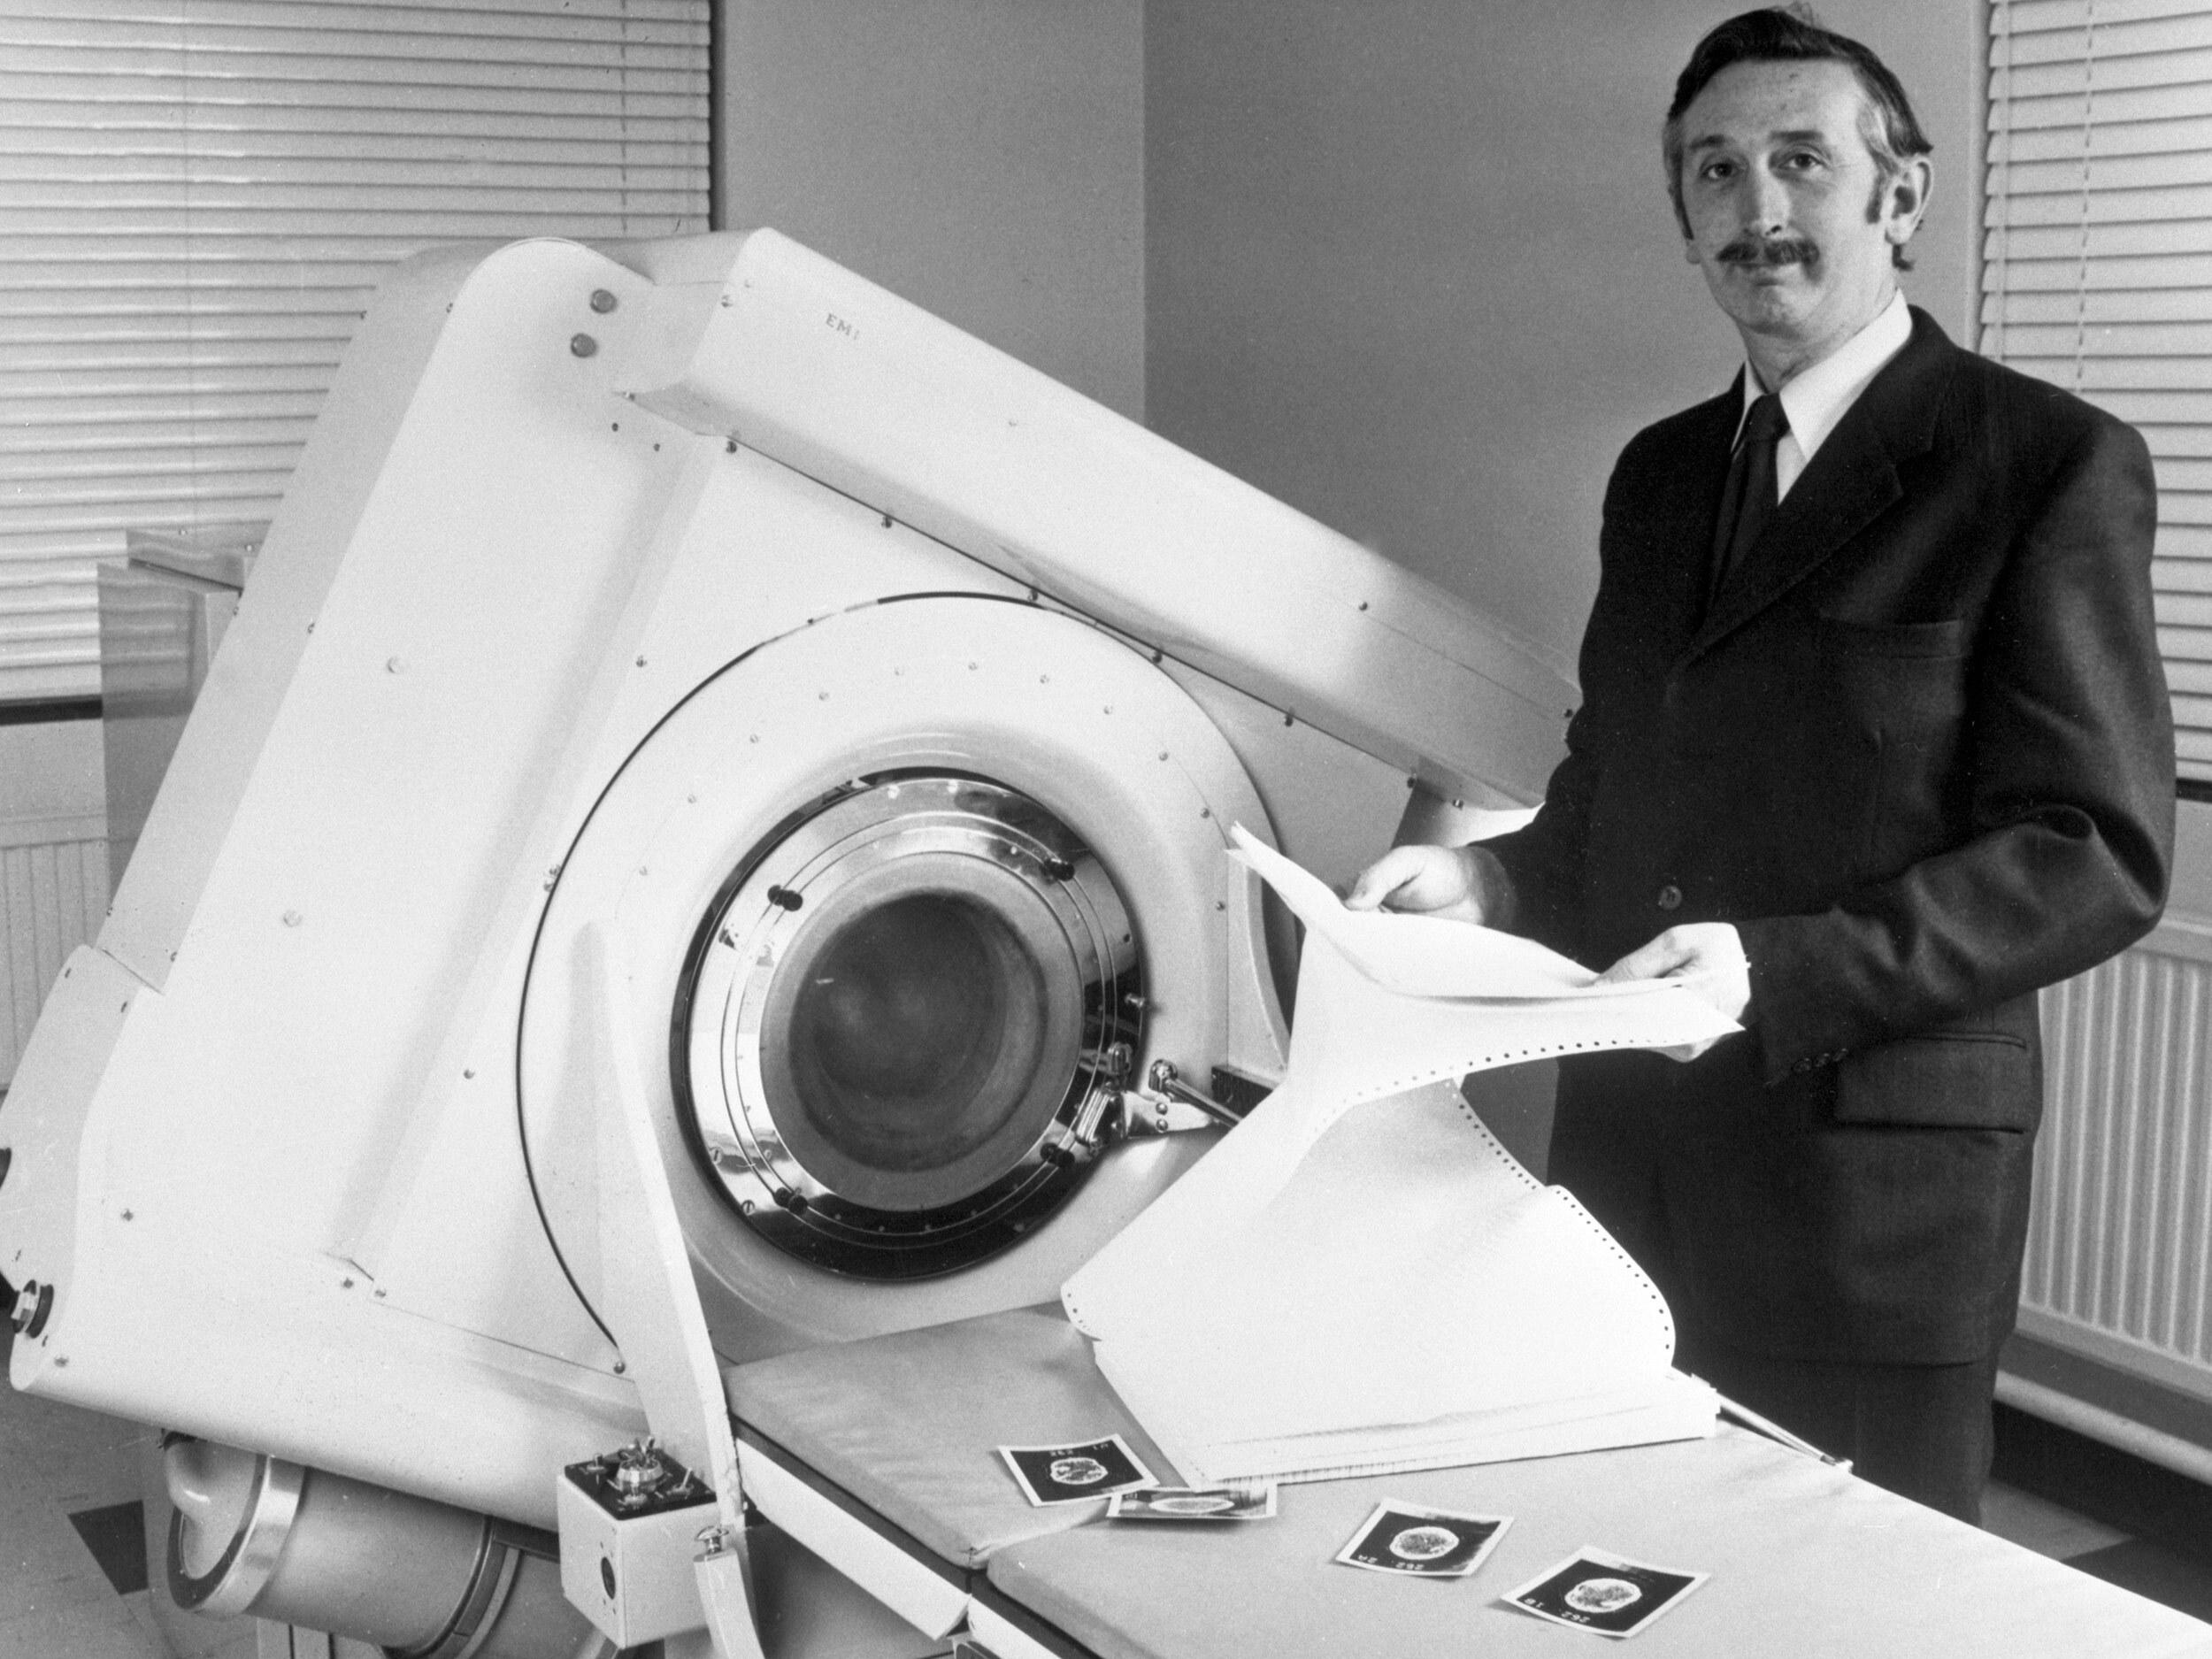 How Record Company Engineer Invented the CT Scanner - IEEE Spectrum